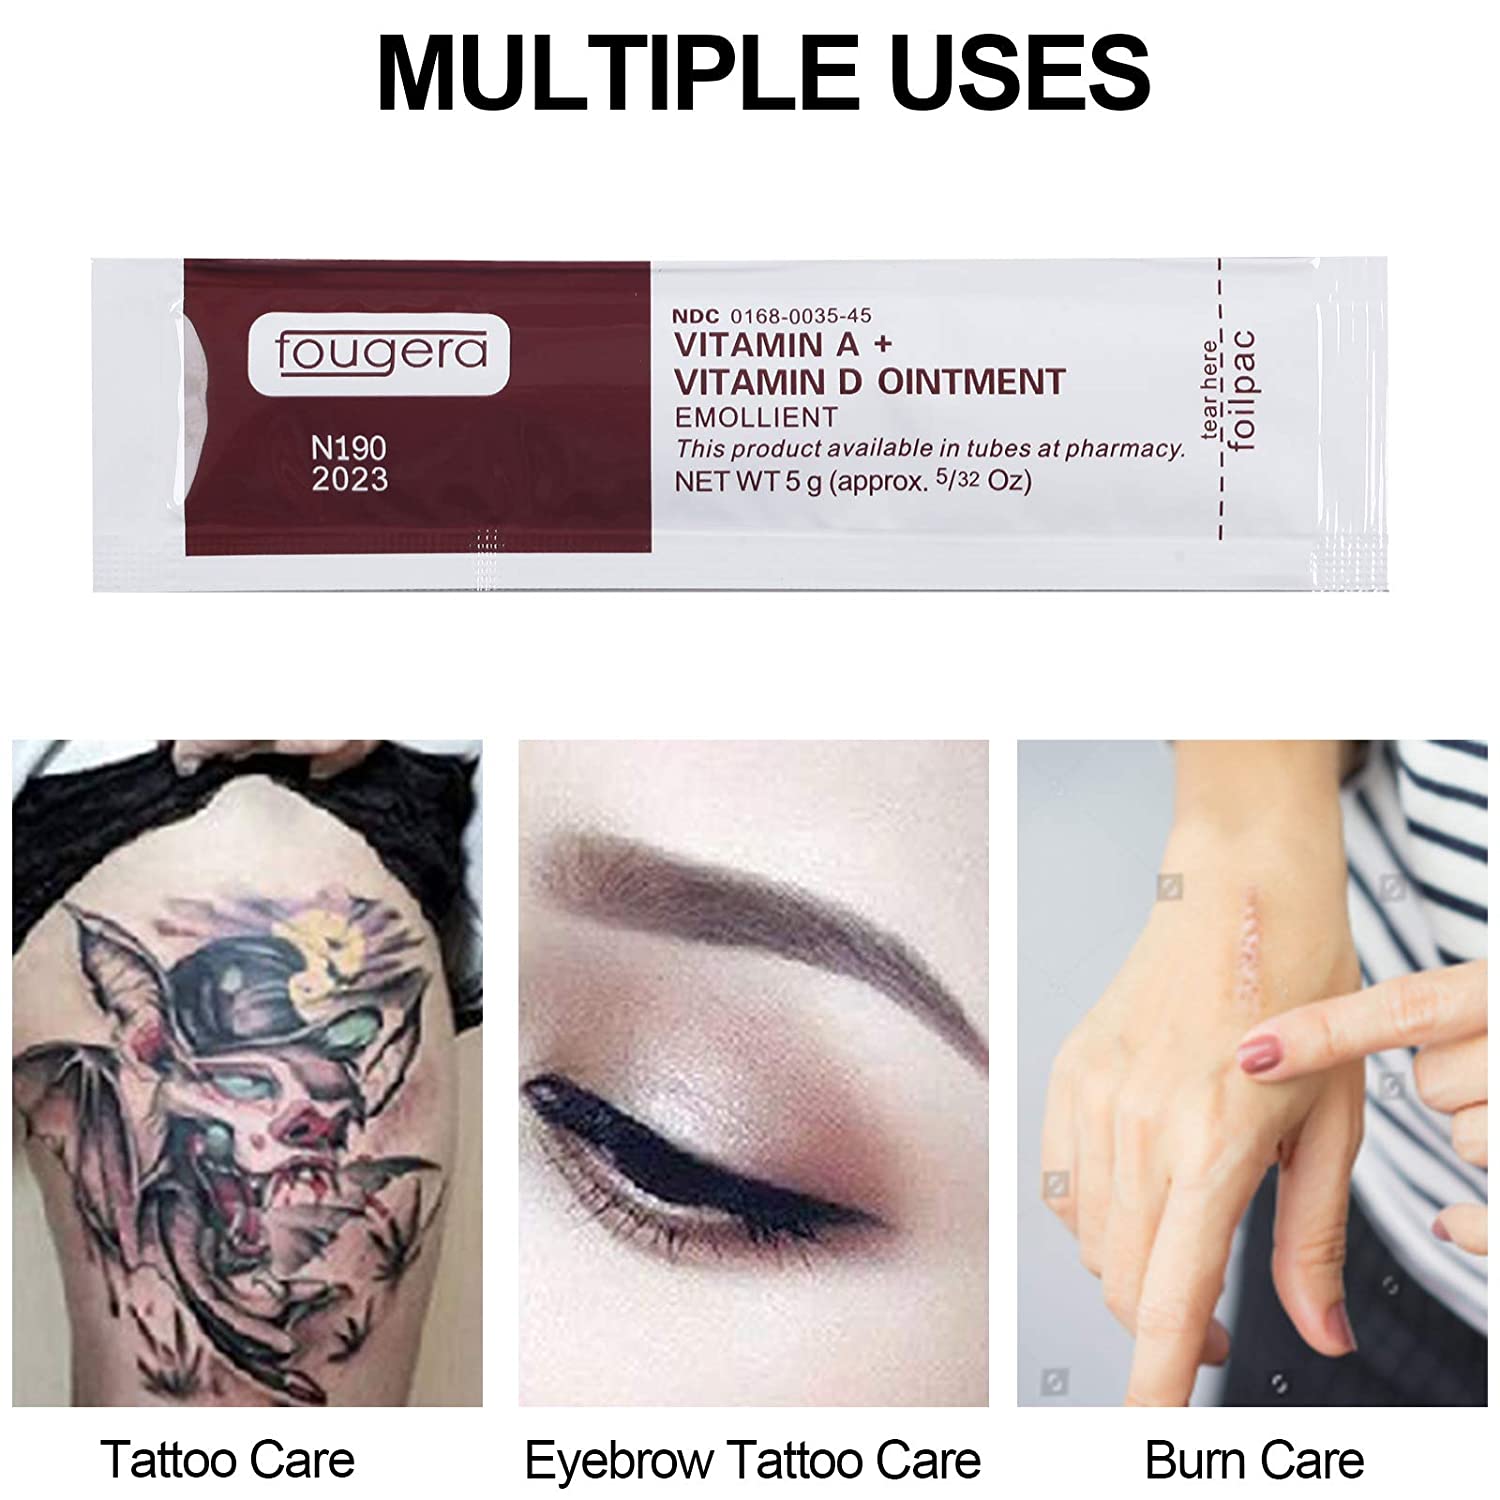 Tattoo Aftercare Cream,Tattoo Aftercare Balm Tattoo Cream Tattoo Repair for  After,Brightener Moisturizing Ointment,Enhances Tattoo Colors,Tattoo Makeup  Aftercare Repair Cream Healing Vitamin(15g) : Amazon.co.uk: Beauty